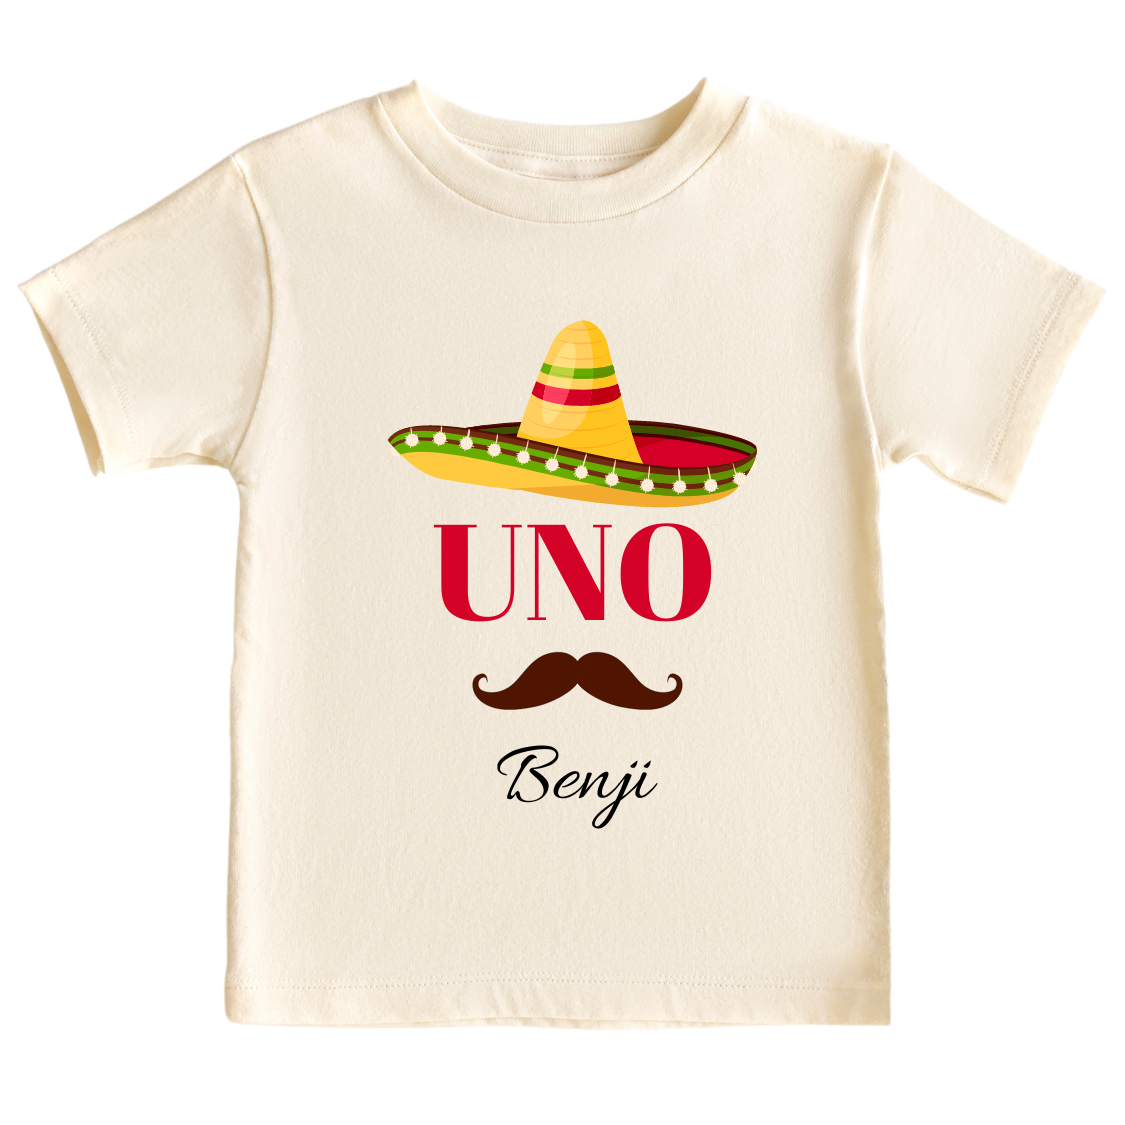 Kid's t-shirt with a cute 'Uno' design, customizable for personalization.